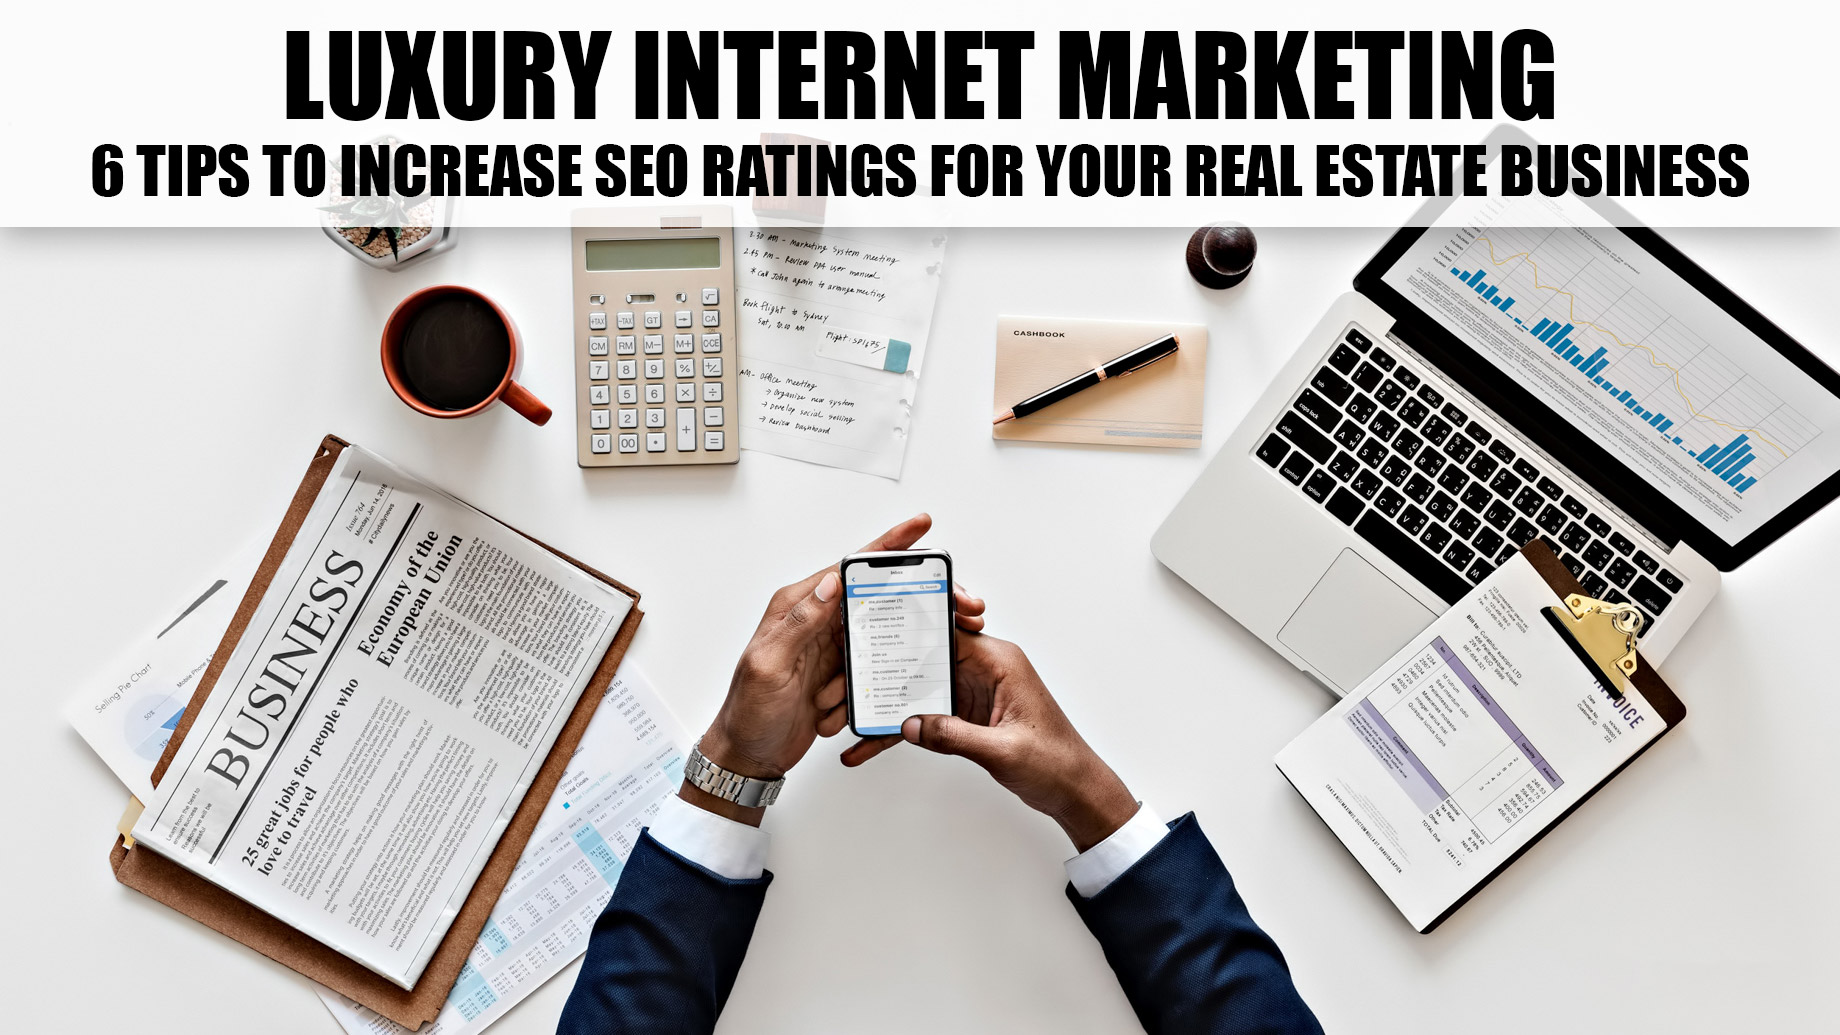 Luxury Internet Marketing - 6 Tips to Increase SEO Ratings for Your Real Estate Business